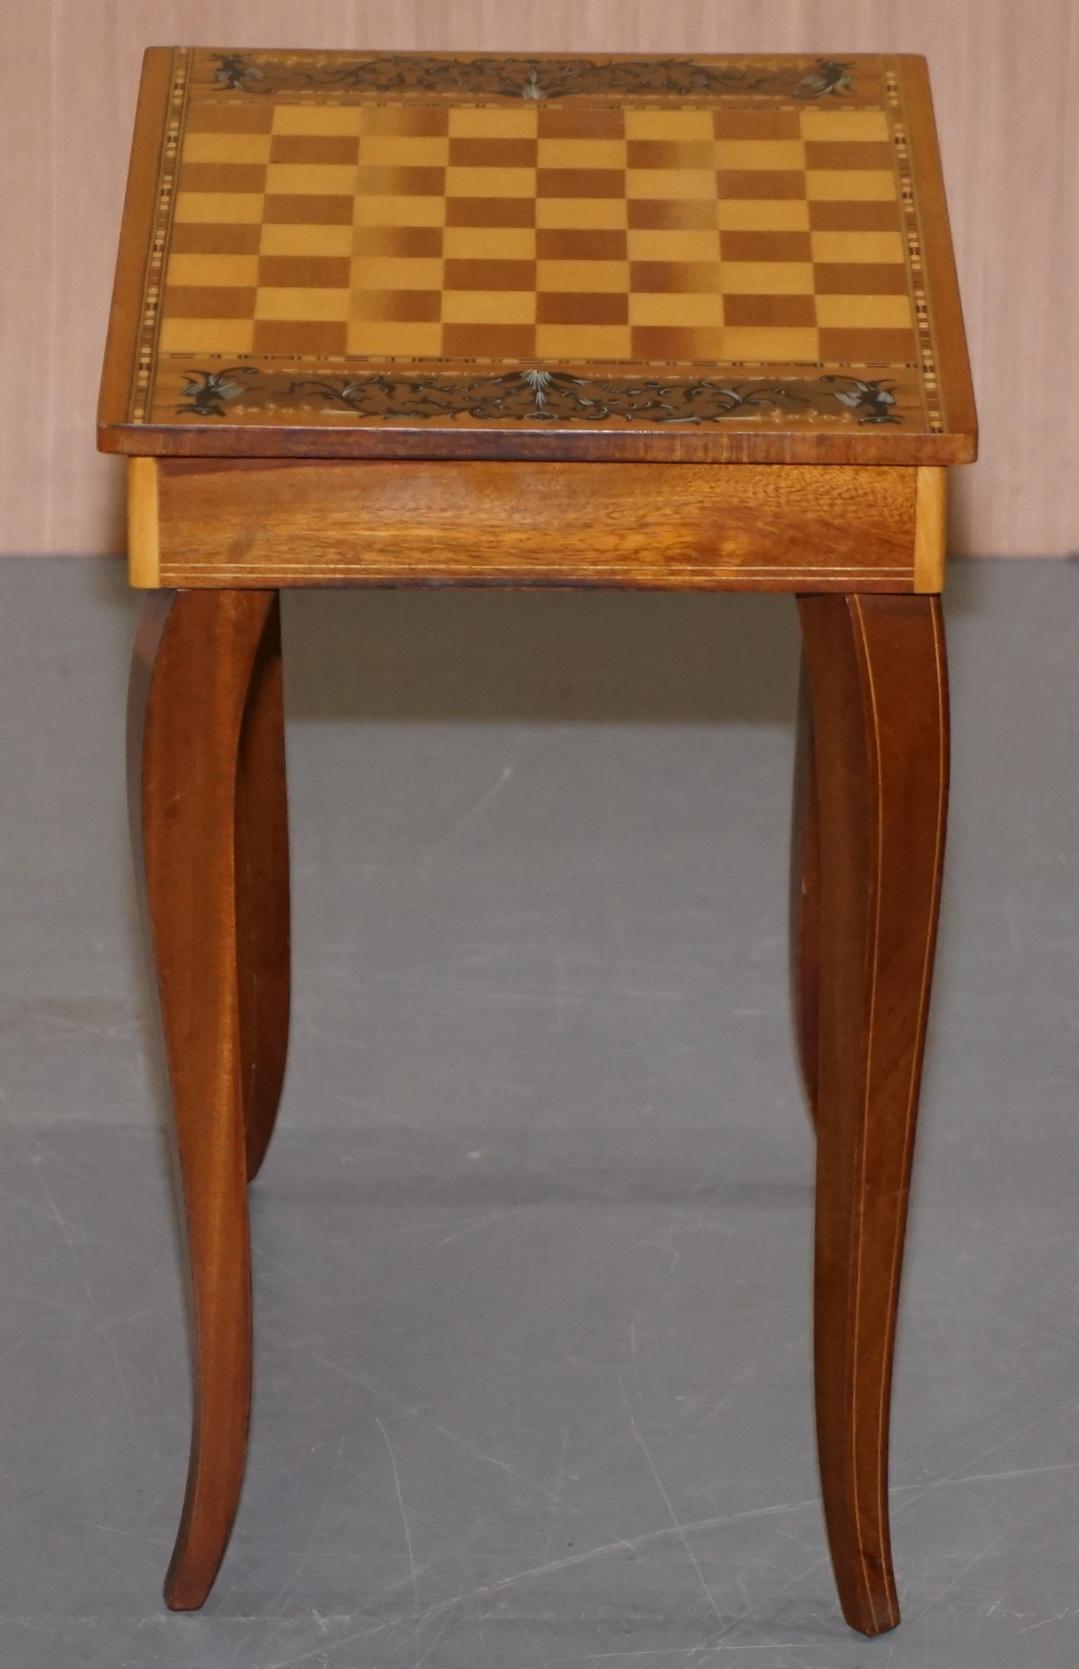 Wood Lovely Small Musical Chess Backgammon Games Table with Drawer and Chess Pieces